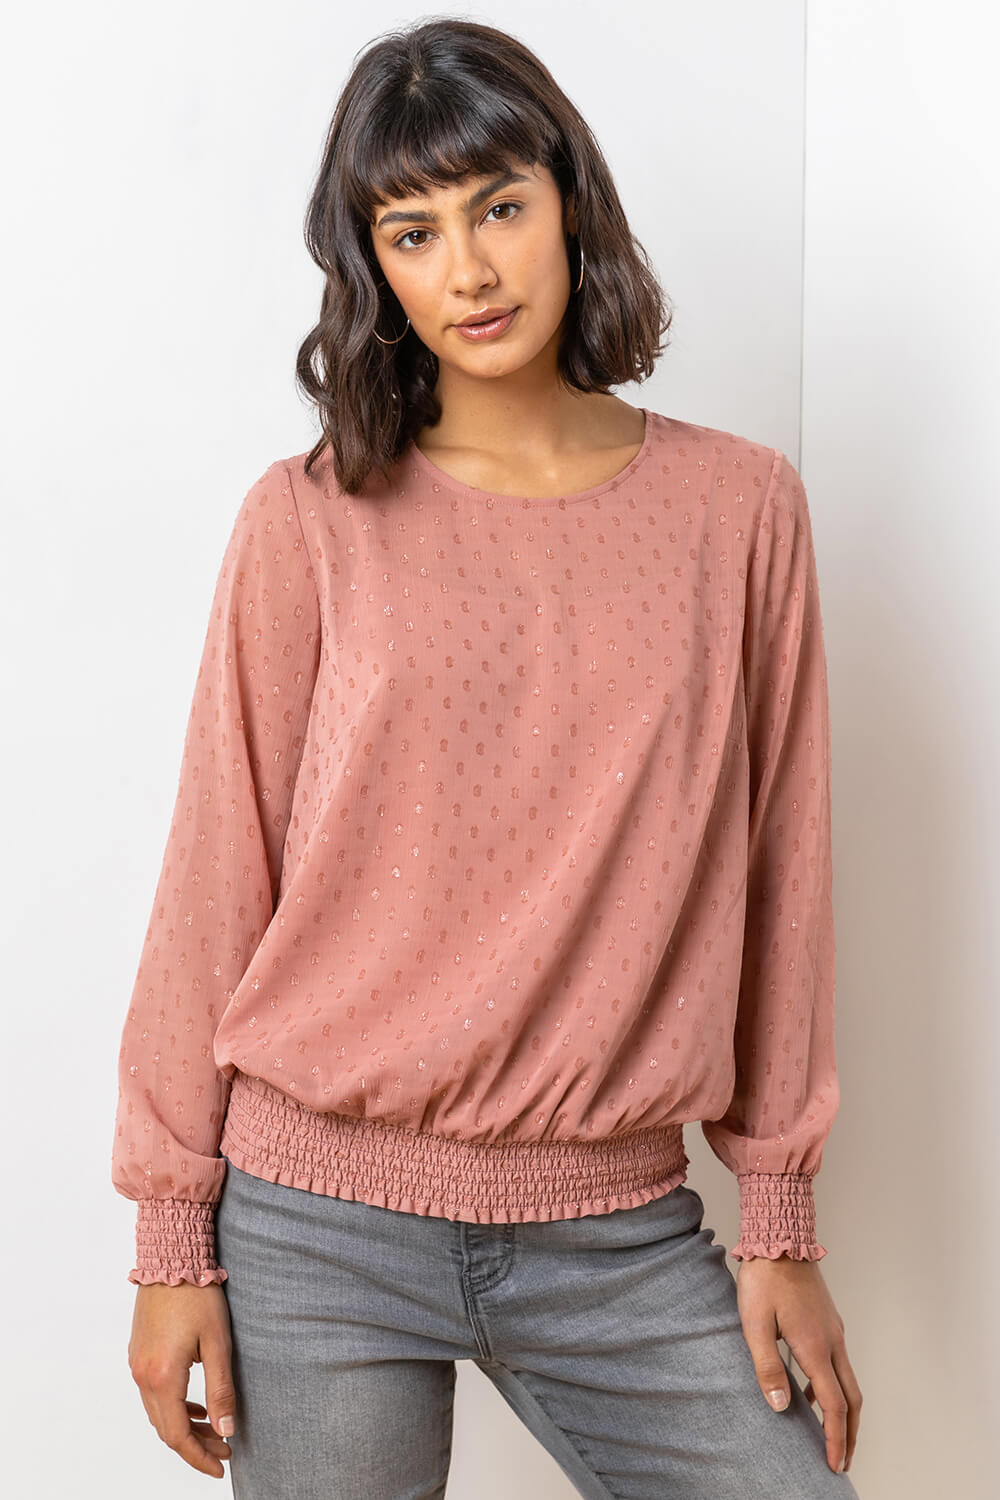 Salmon Textured Spot Shirred Shimmer Top, Image 5 of 5